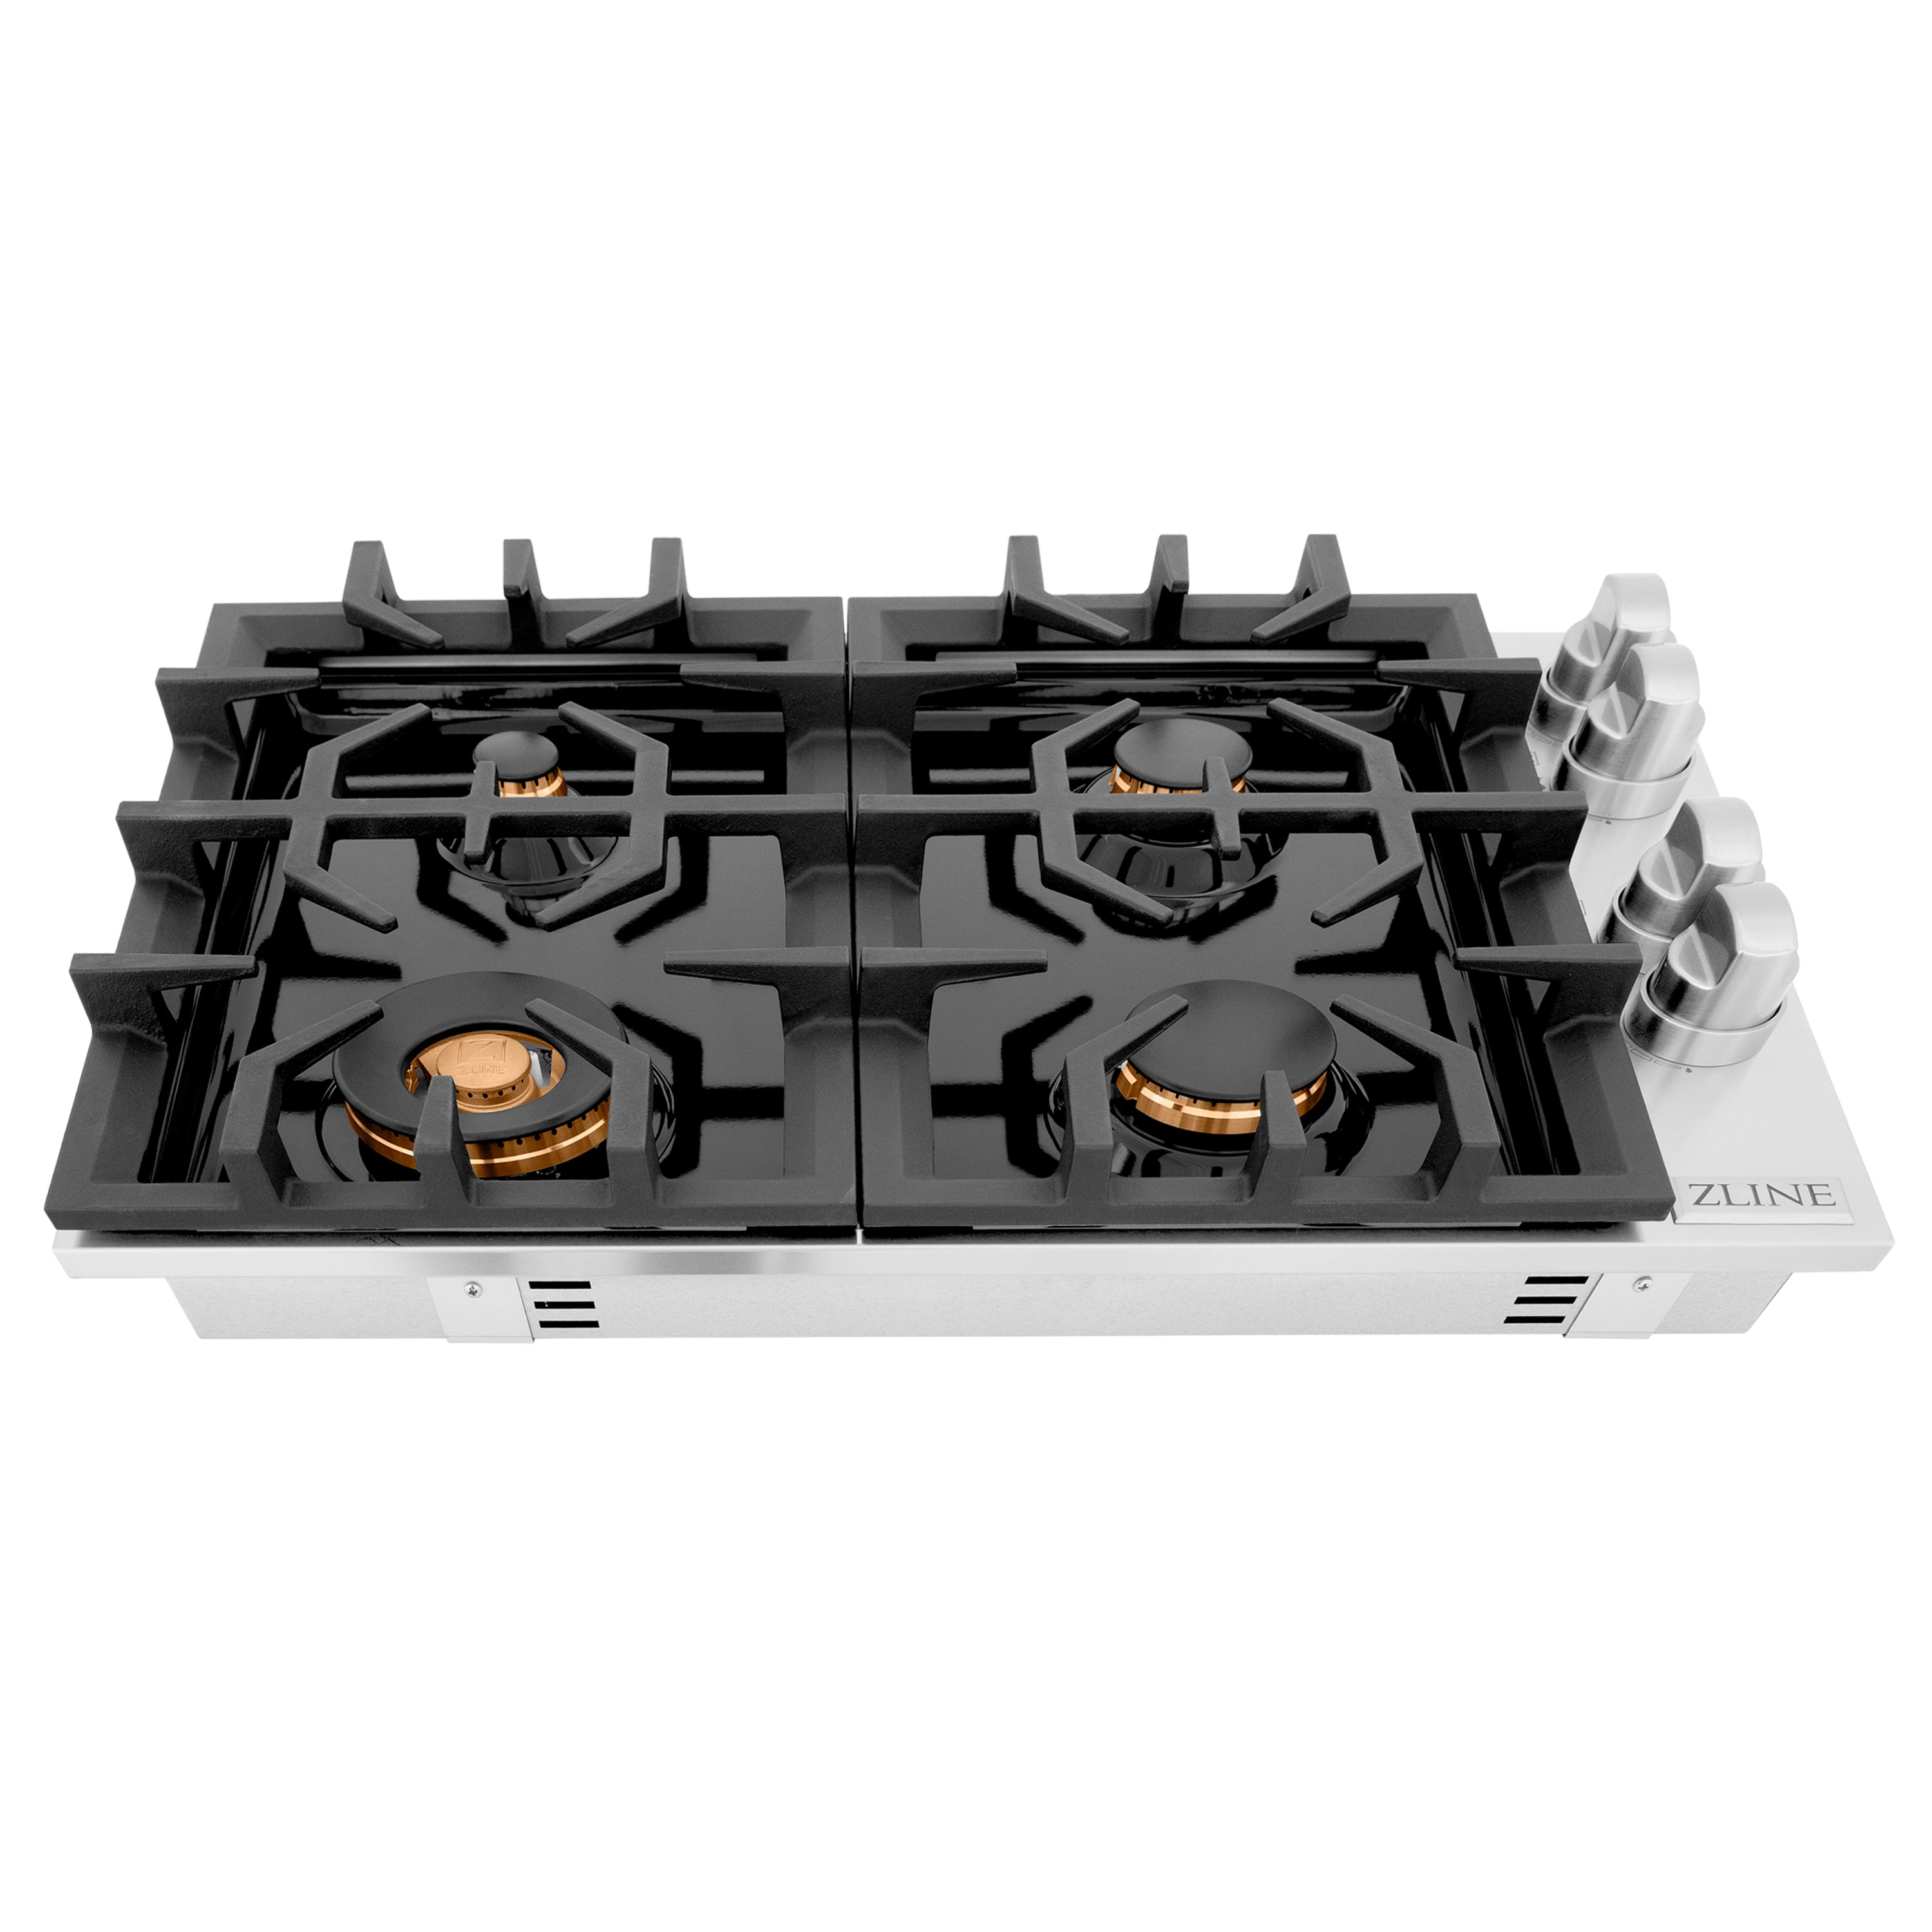 ZLINE 30" Dropin Gas Stovetop with 4 Gas Brass Burners and Black Porcelain Top (RC-BR-30-PBT)